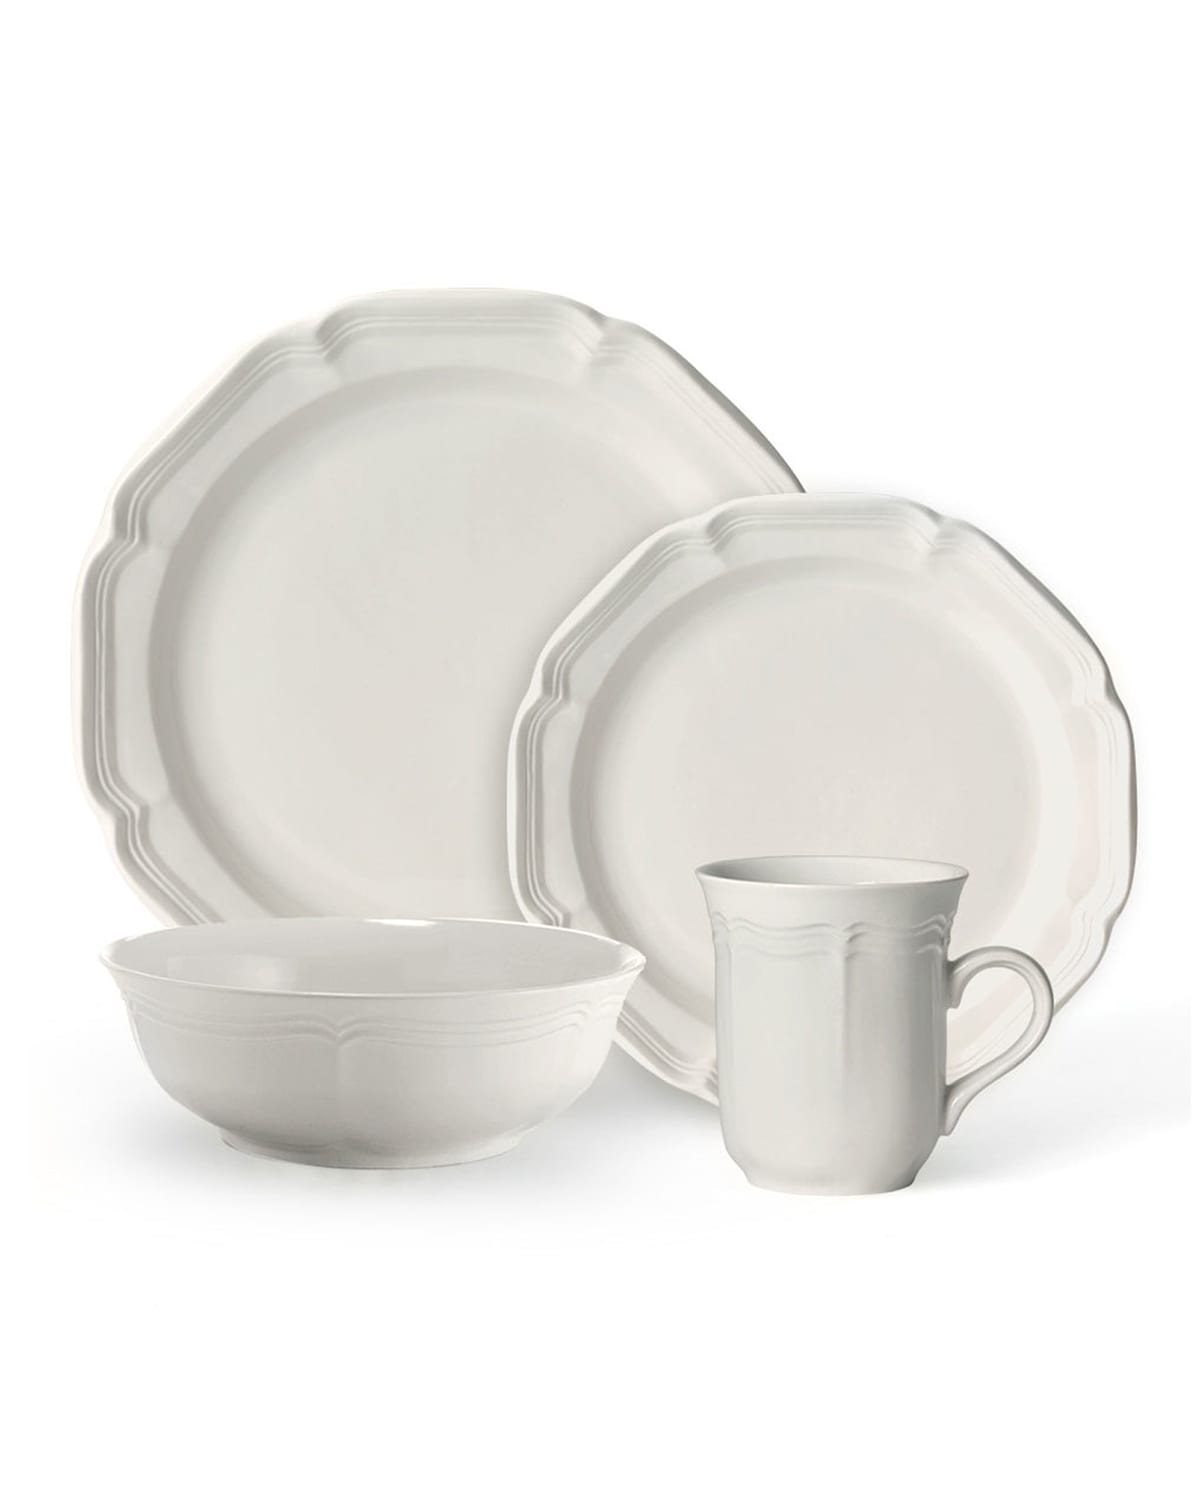 16-Piece French Countryside Dinnerware Set